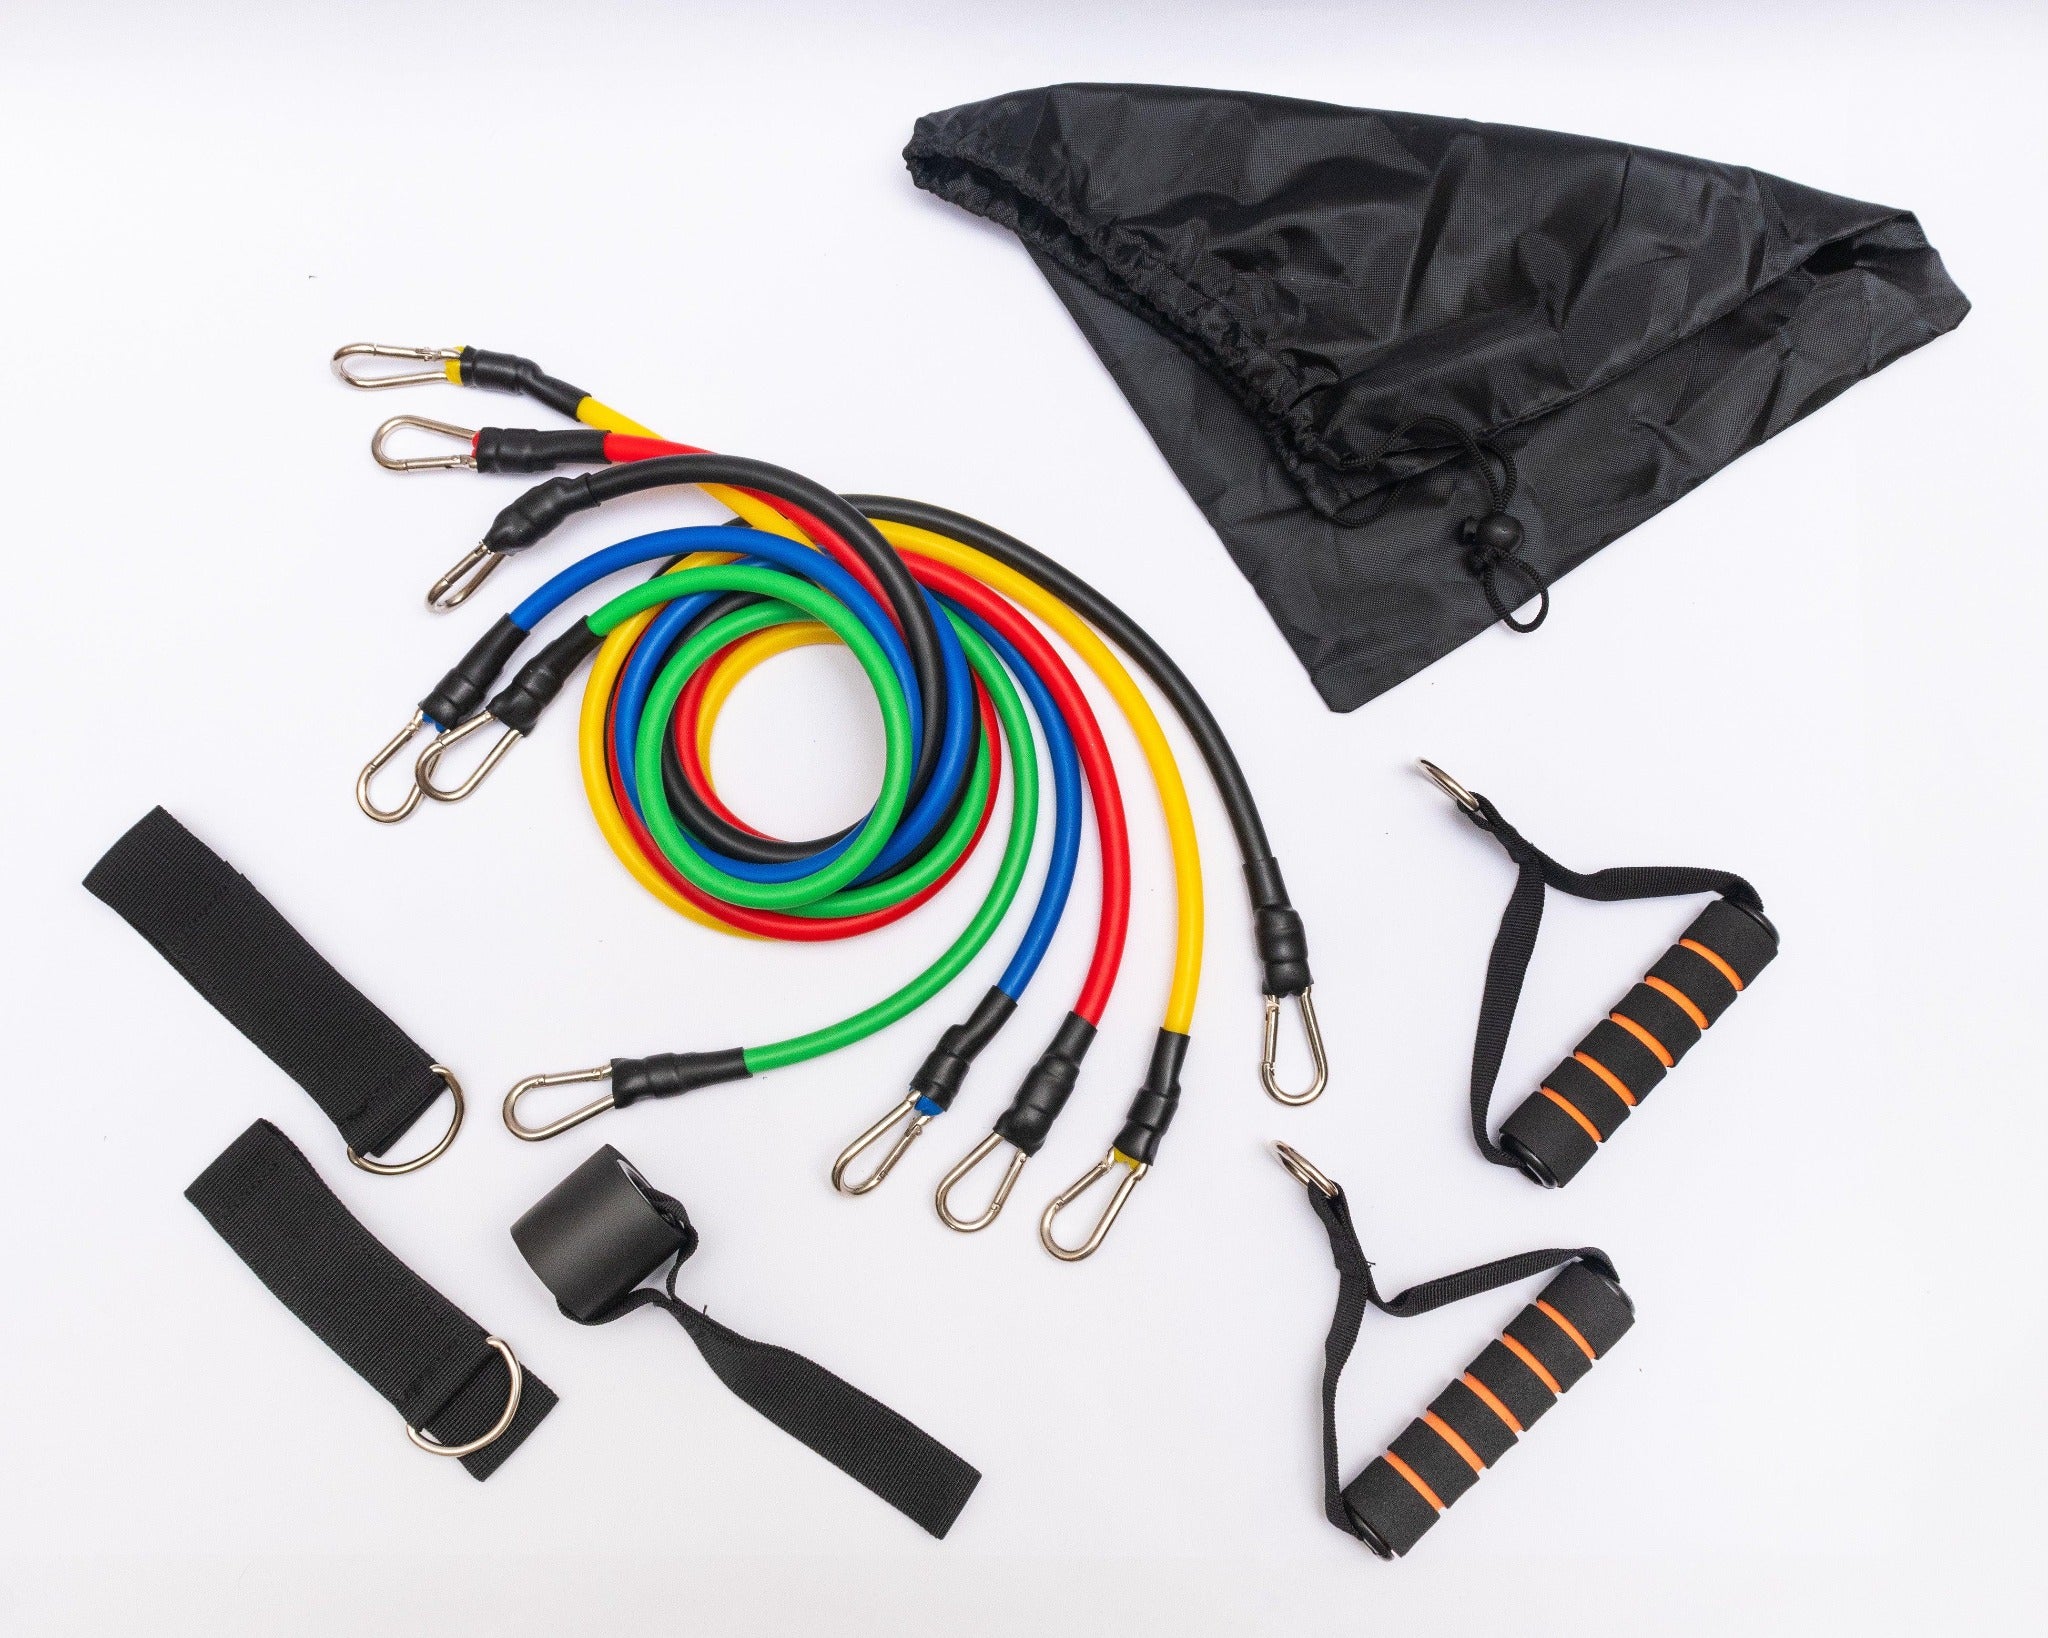 Explore our versatile Resistance Band Set, perfect for home or gym workouts. Enhance strength, flexibility, and endurance with our durable bands.